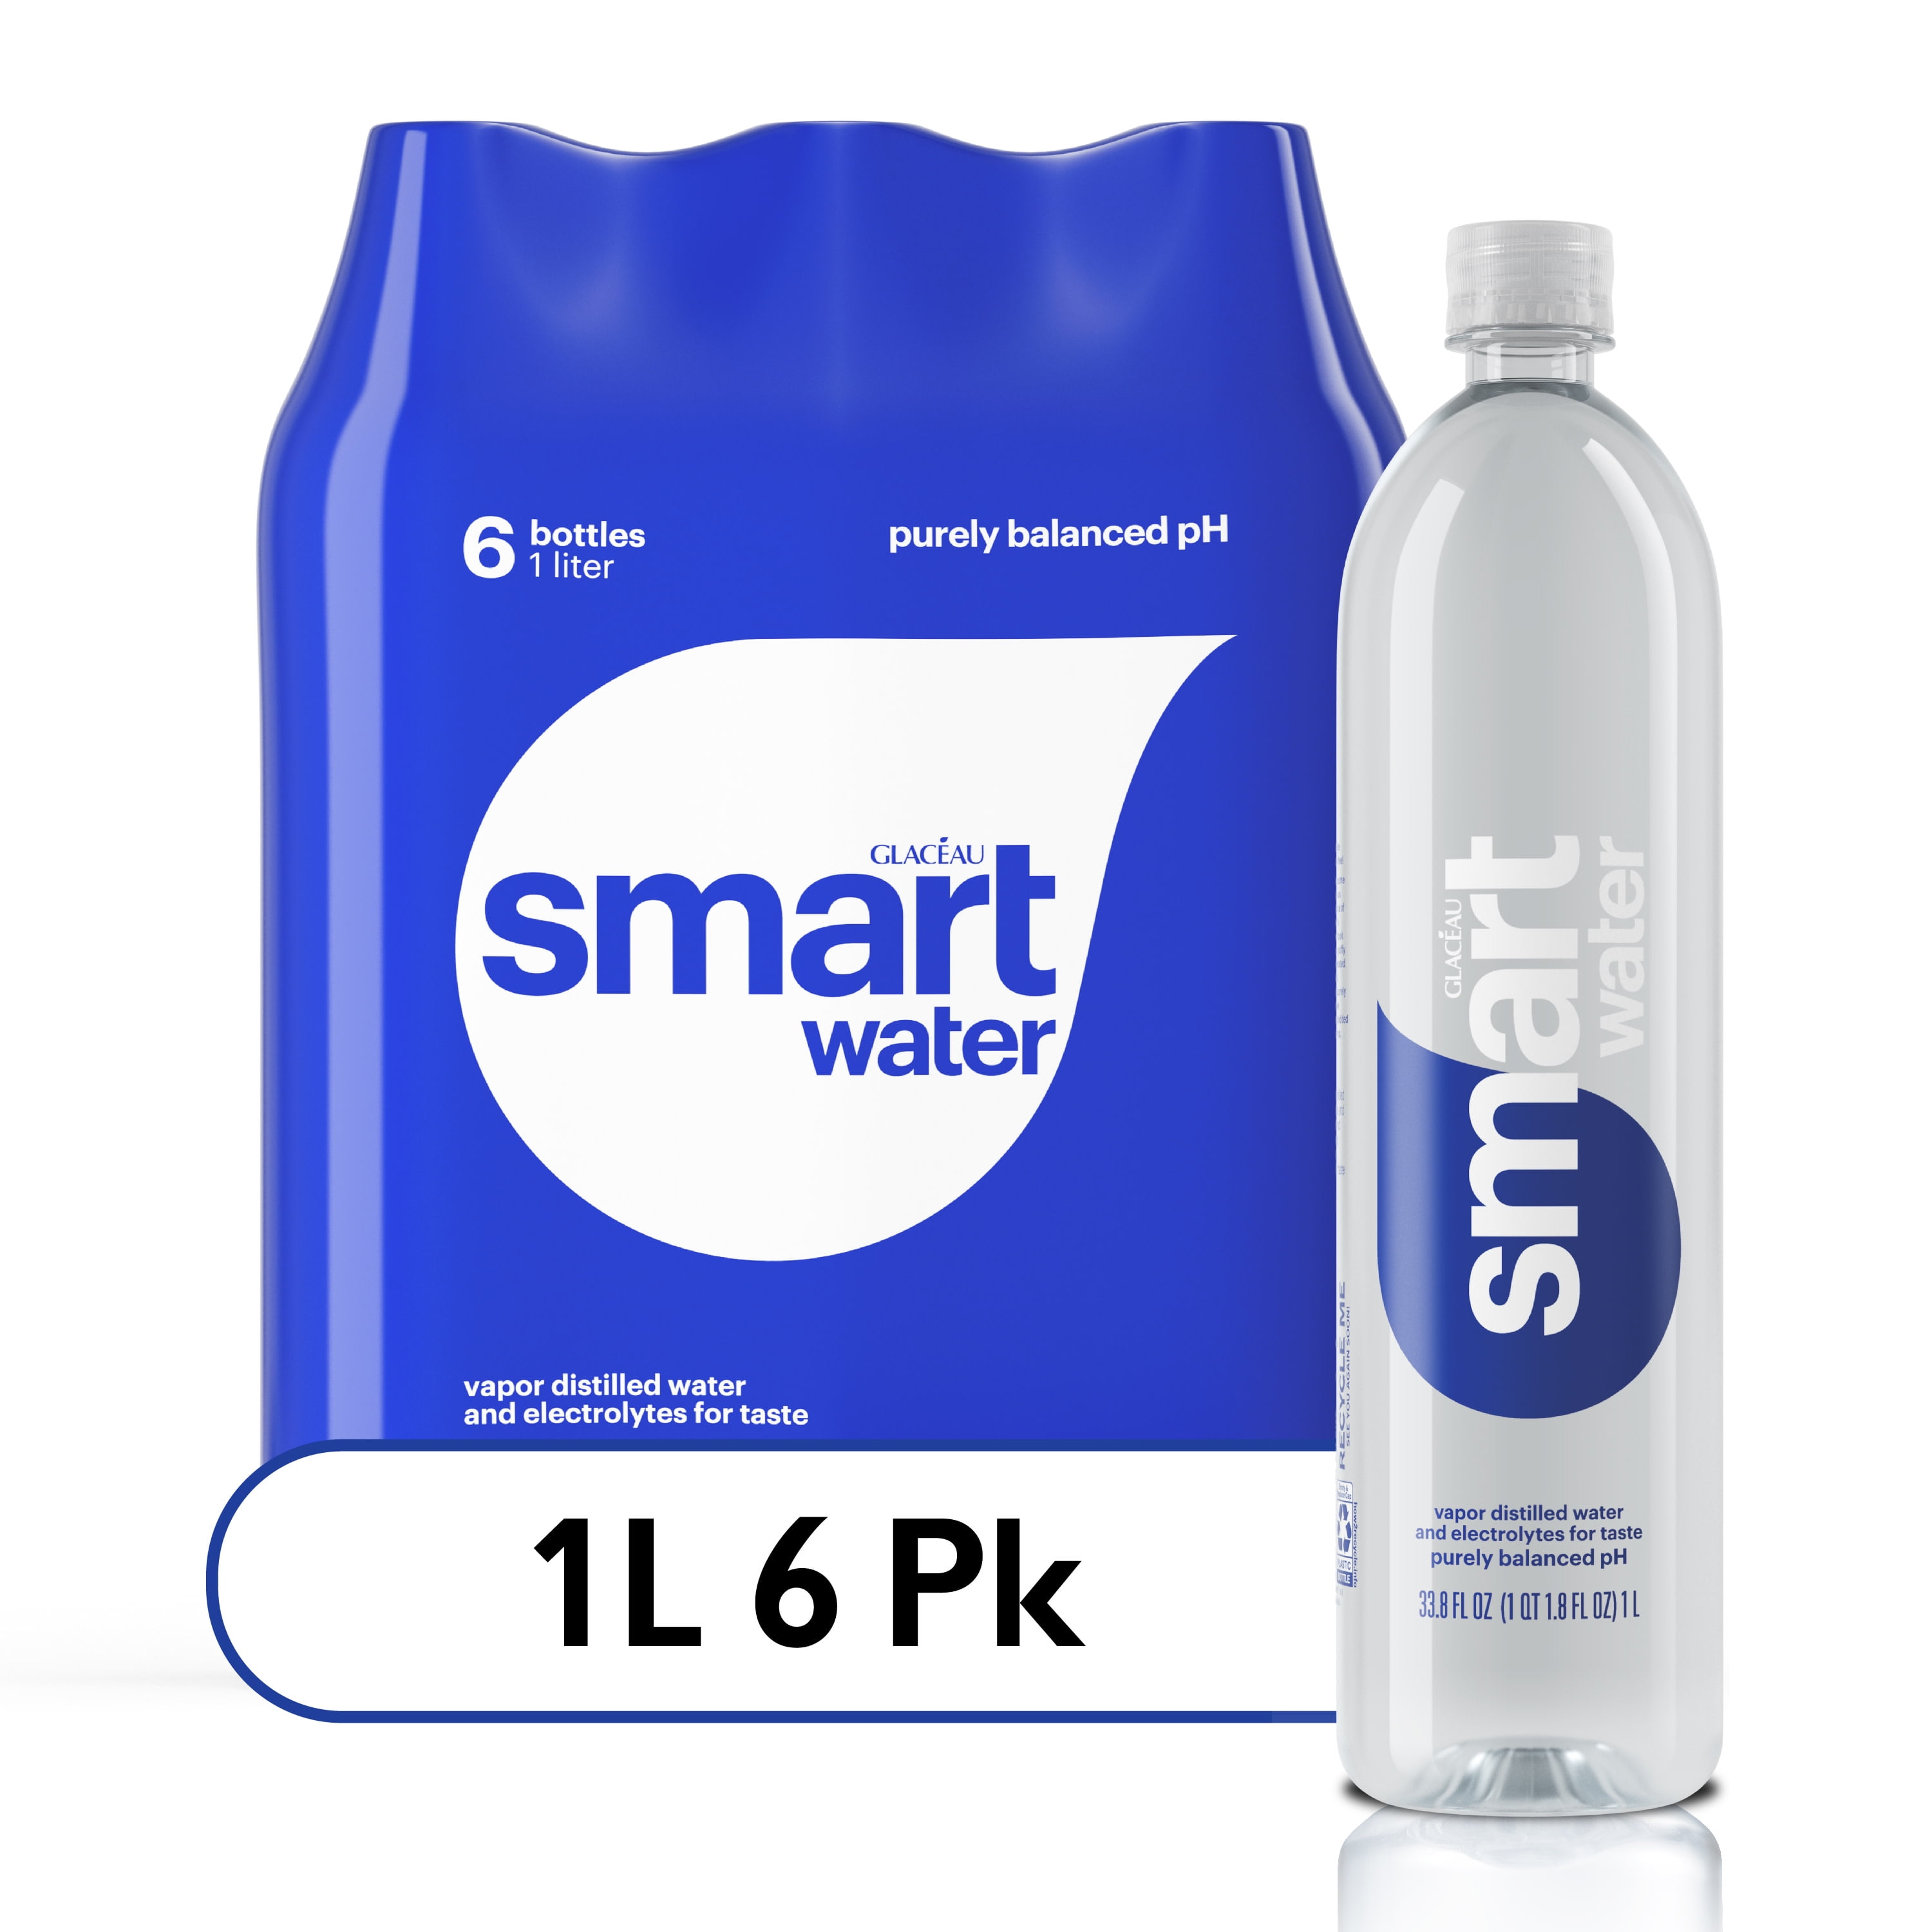 Distilled Water - Buy 500ml Distilled Water Online with Fast Delivery